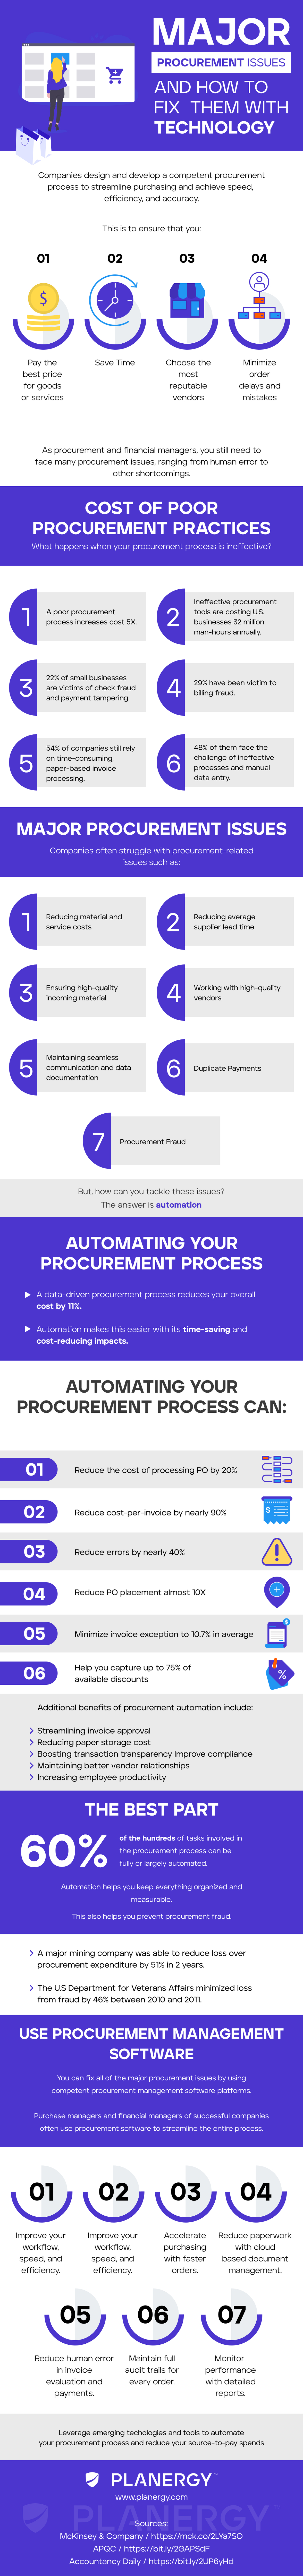 Major Procurement Issues And How To Fix Them With Technology